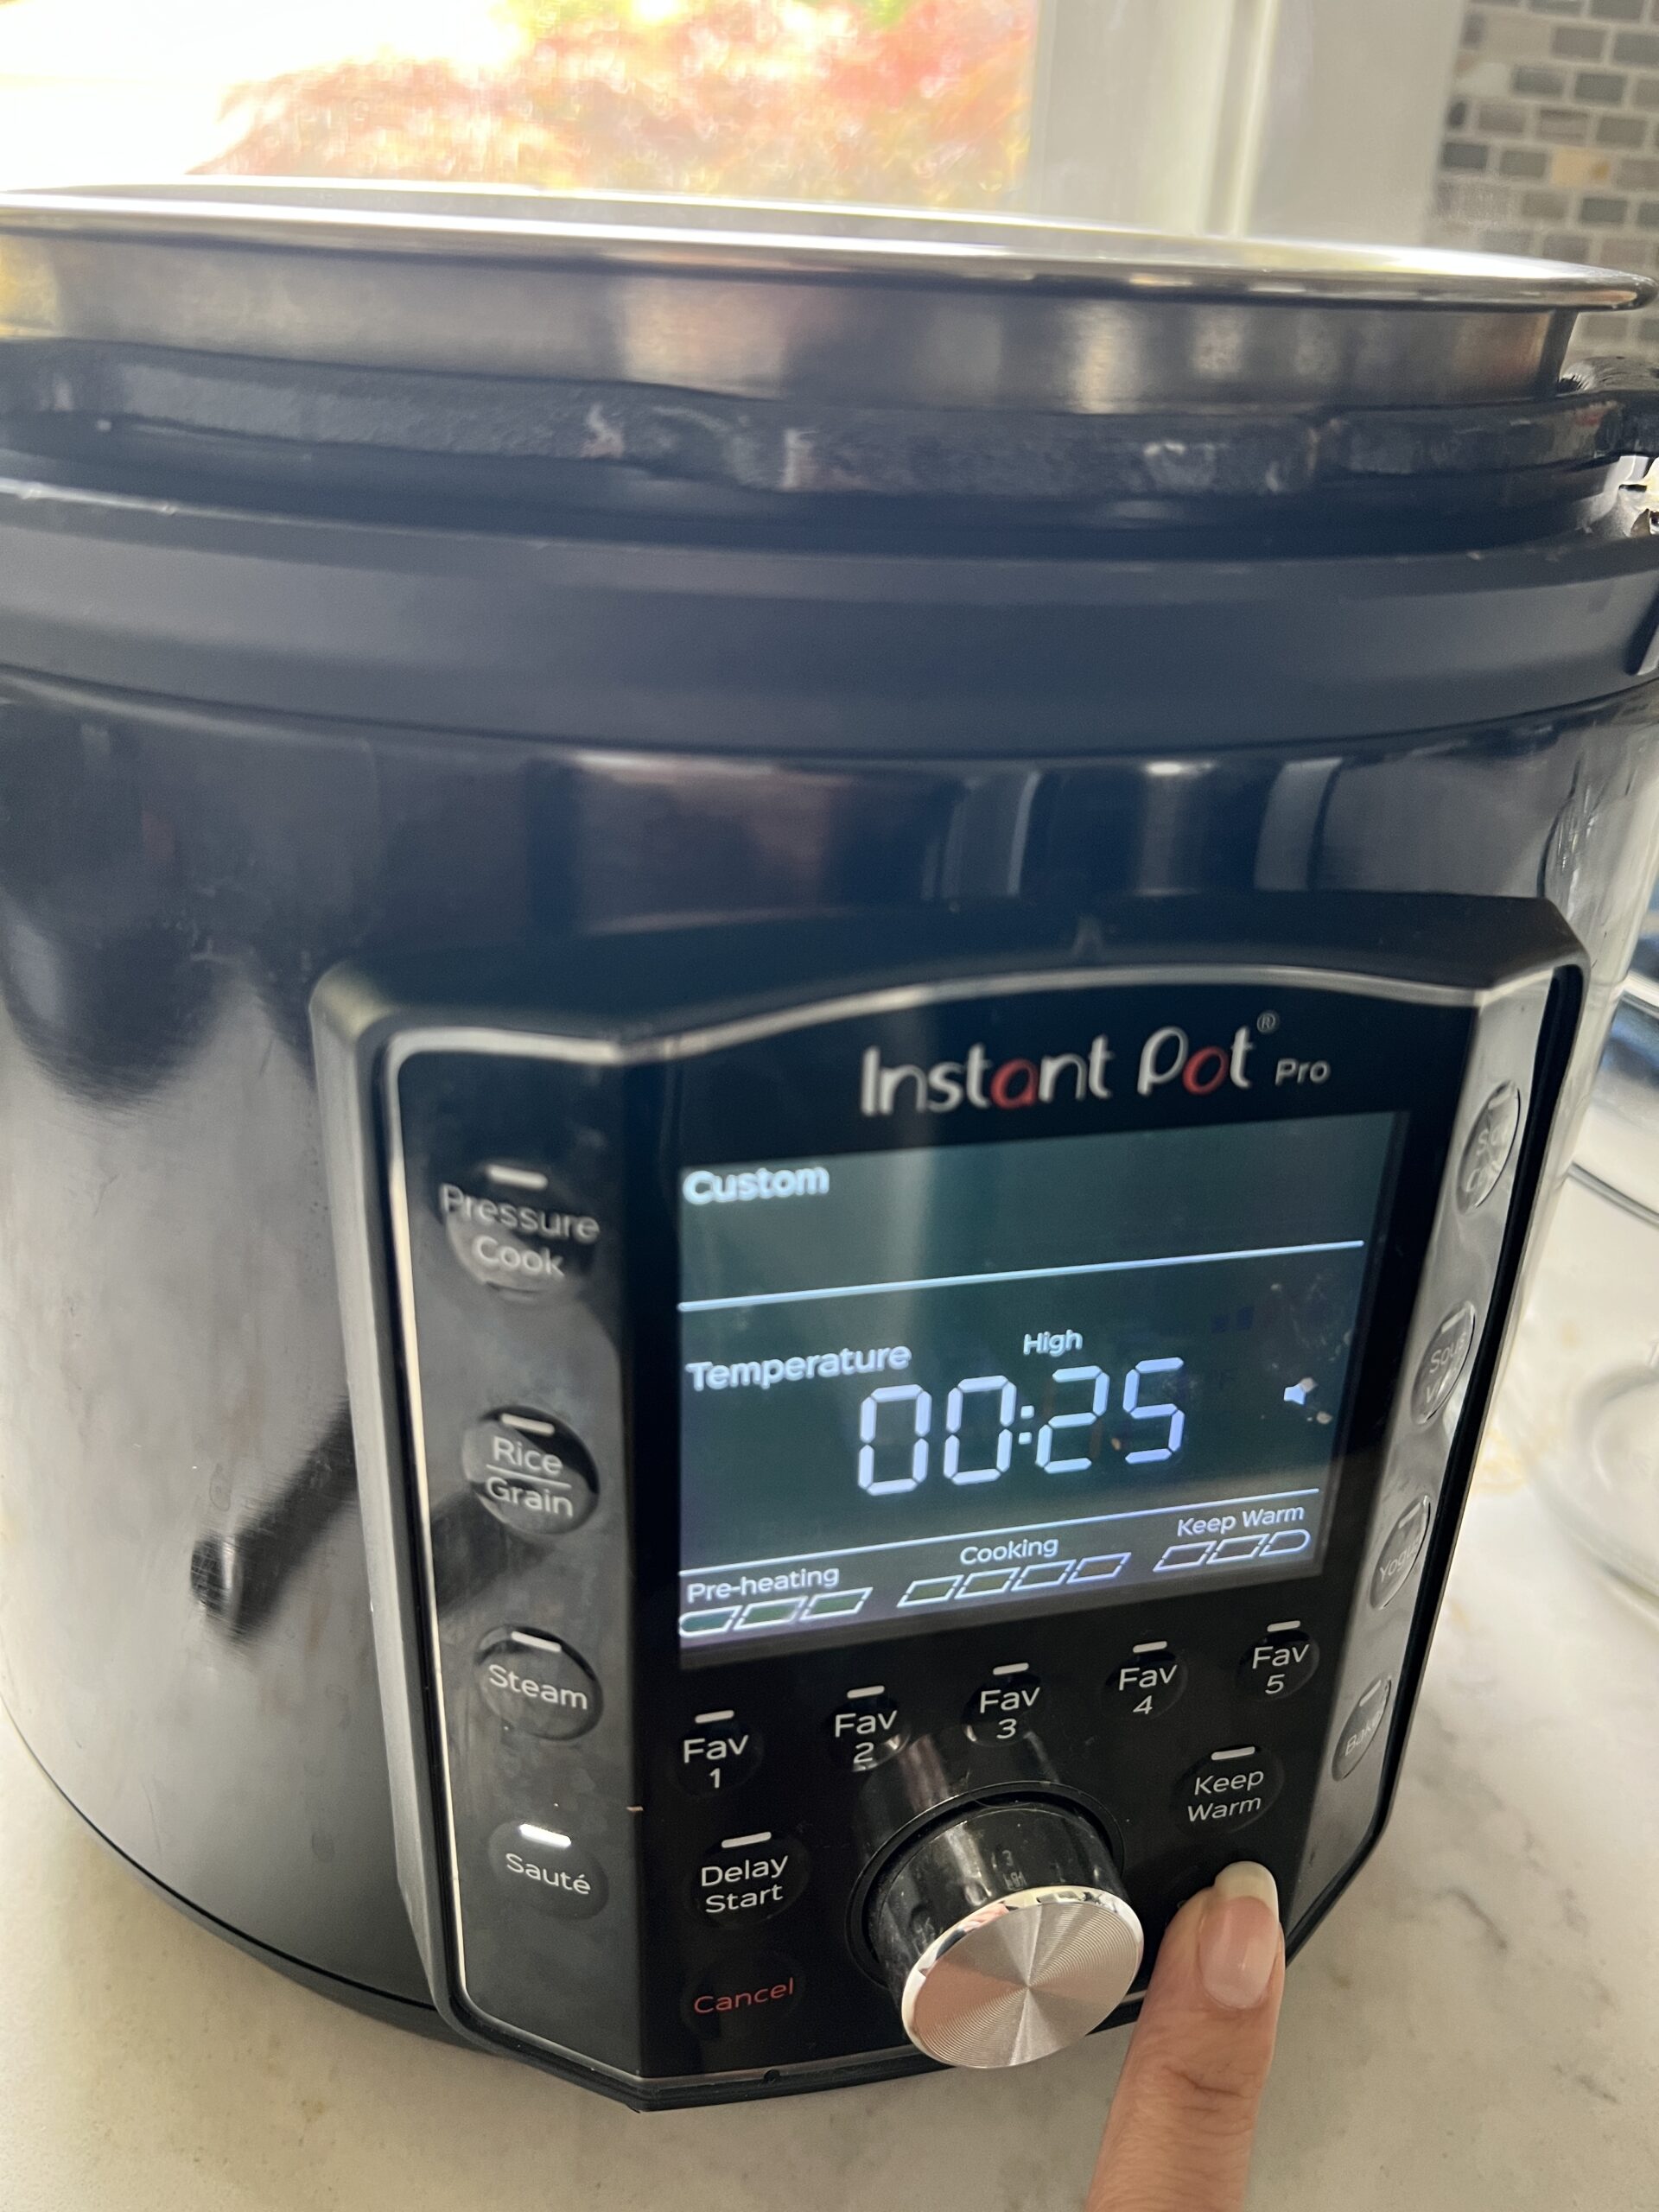 Process recording to adjust the settings on the Instant Pot